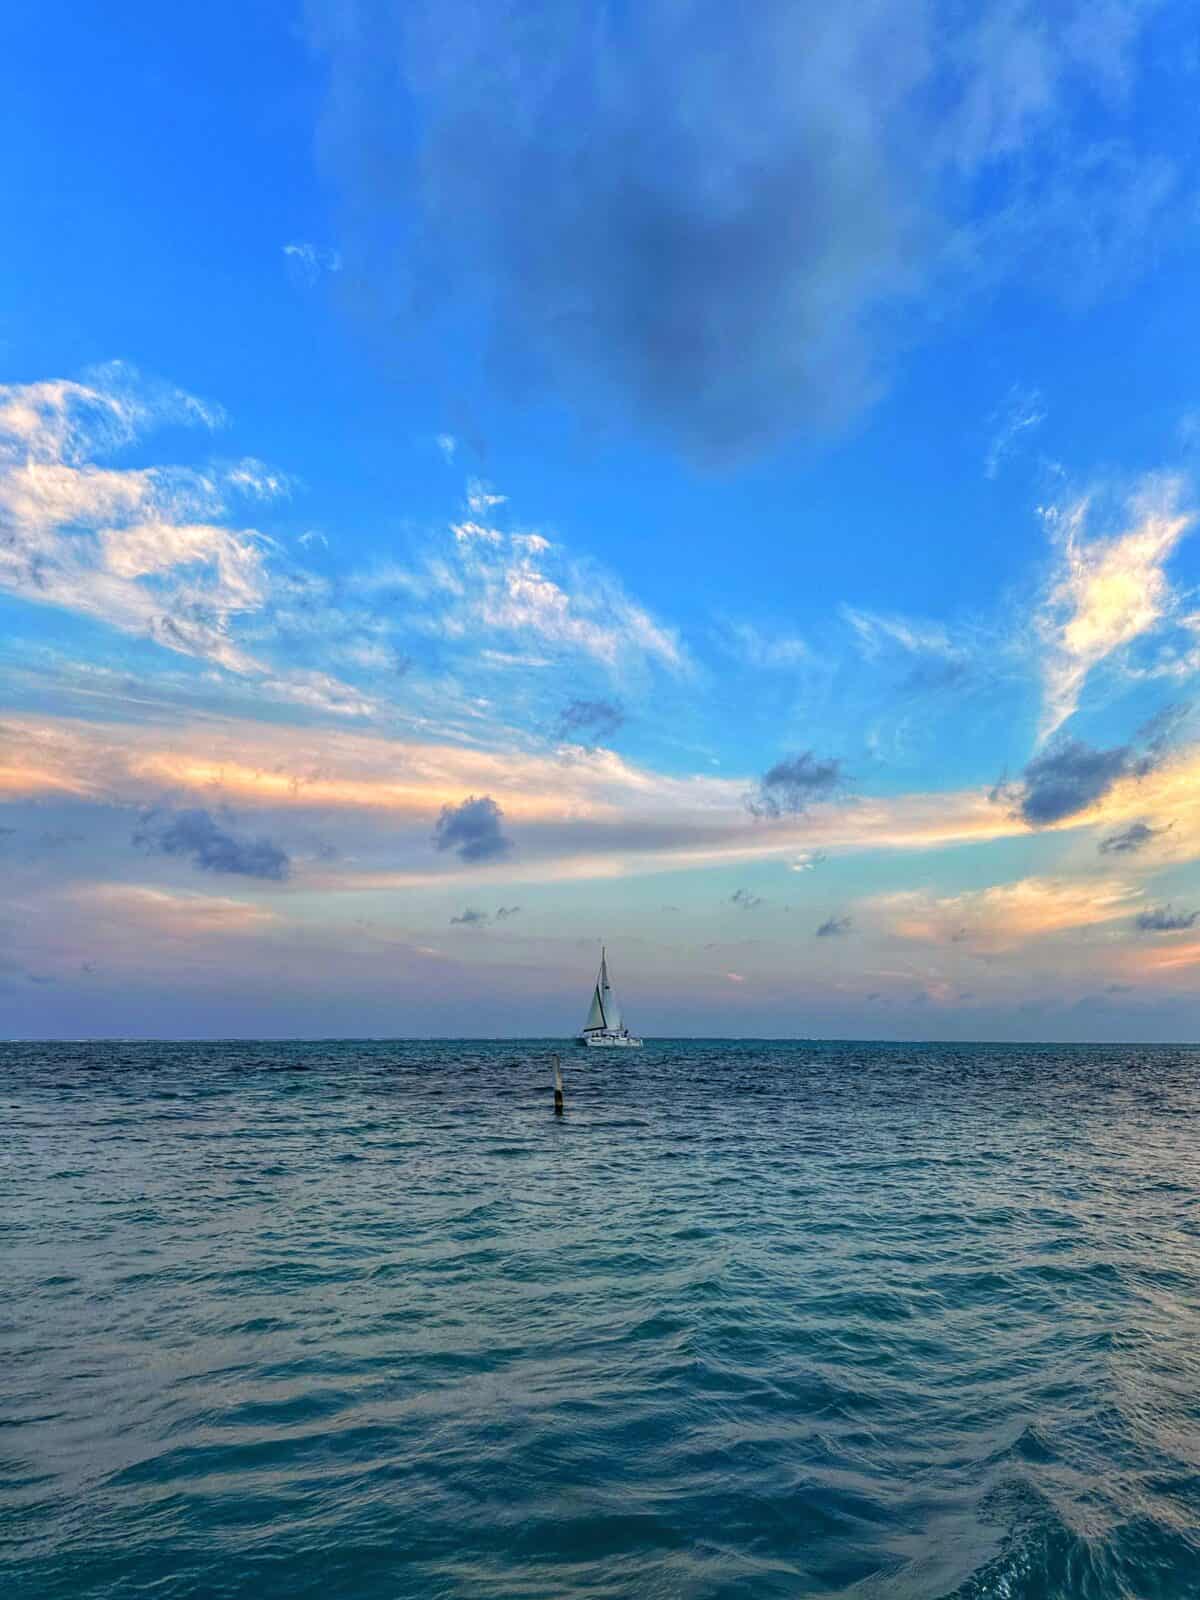 sailboat at sunset on blue waters of the Caribbean Sea in Ambergris Caye Belize